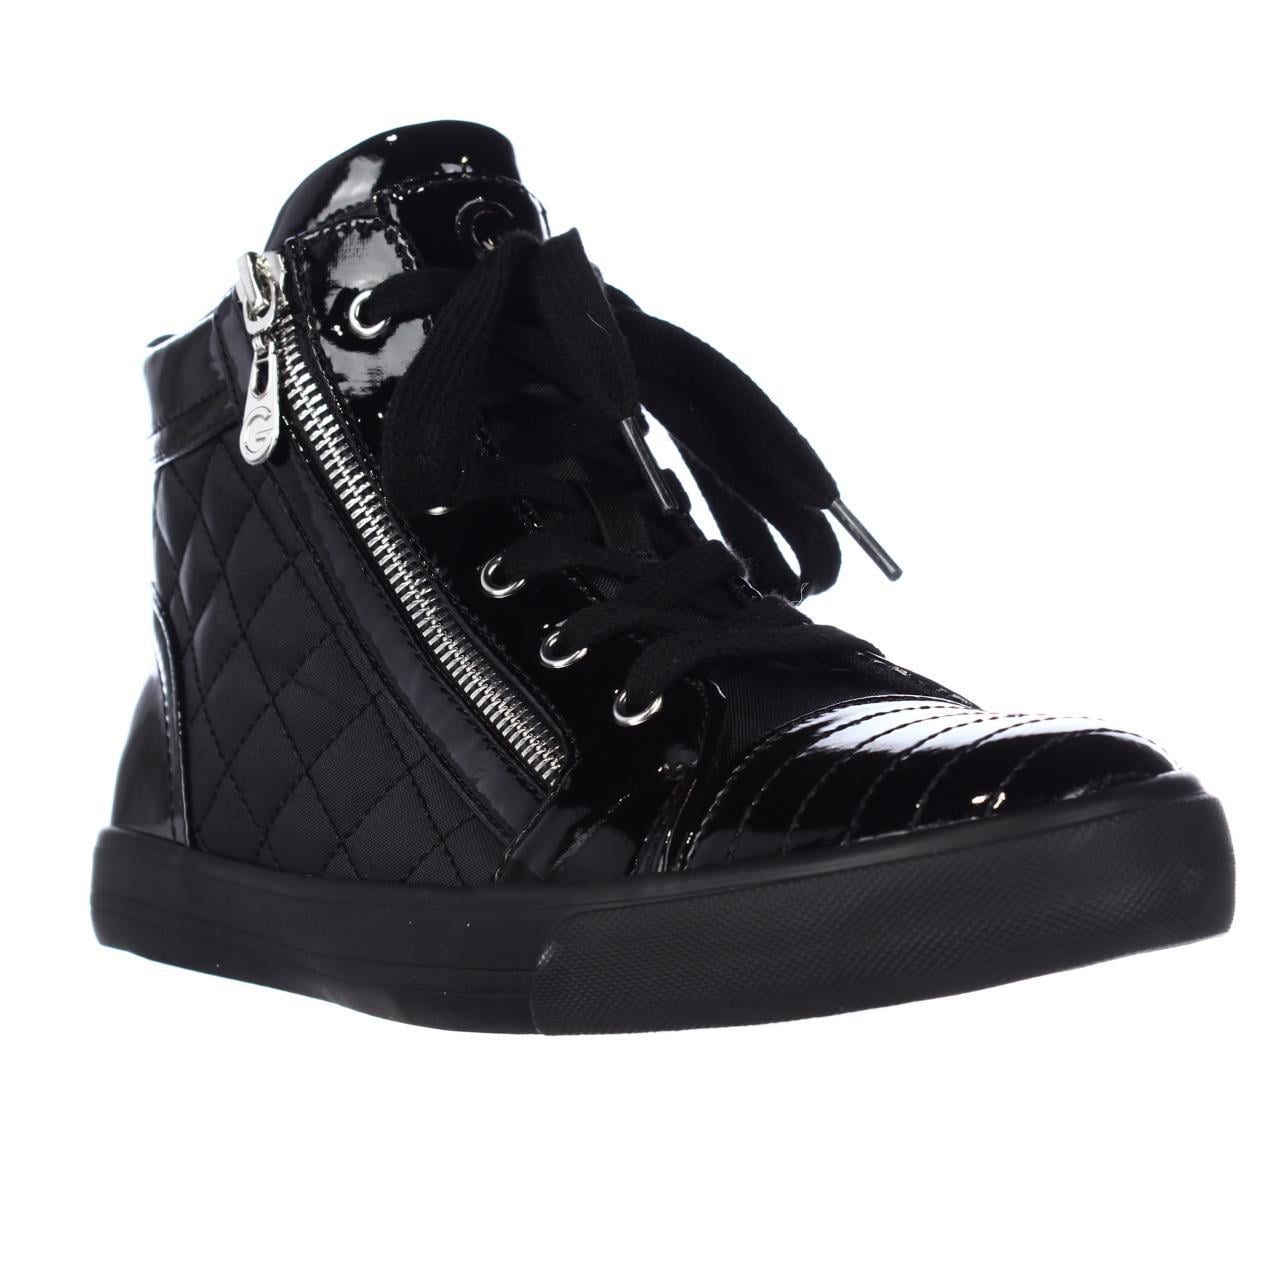 by GUESS Orily Side Zip High Top Fashion Sneakers, 5 US - Walmart.com